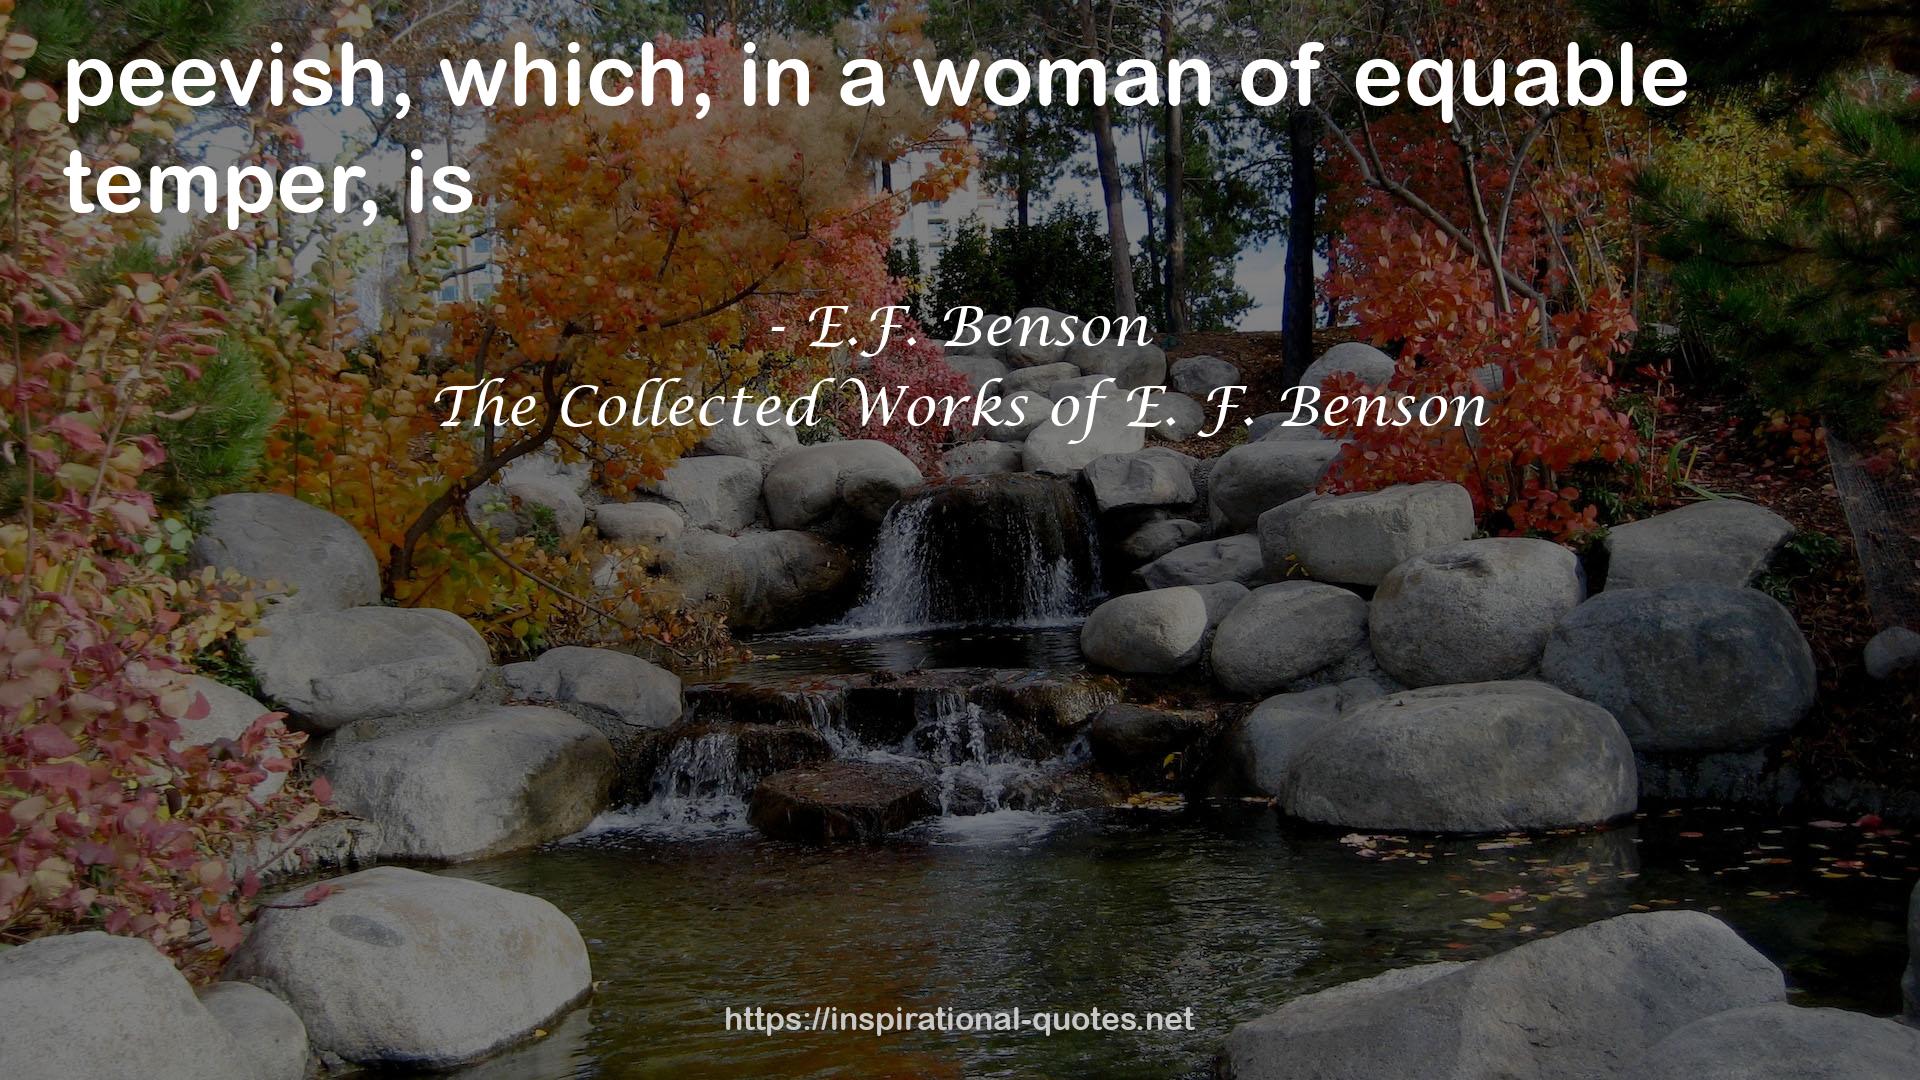 The Collected Works of E. F. Benson QUOTES